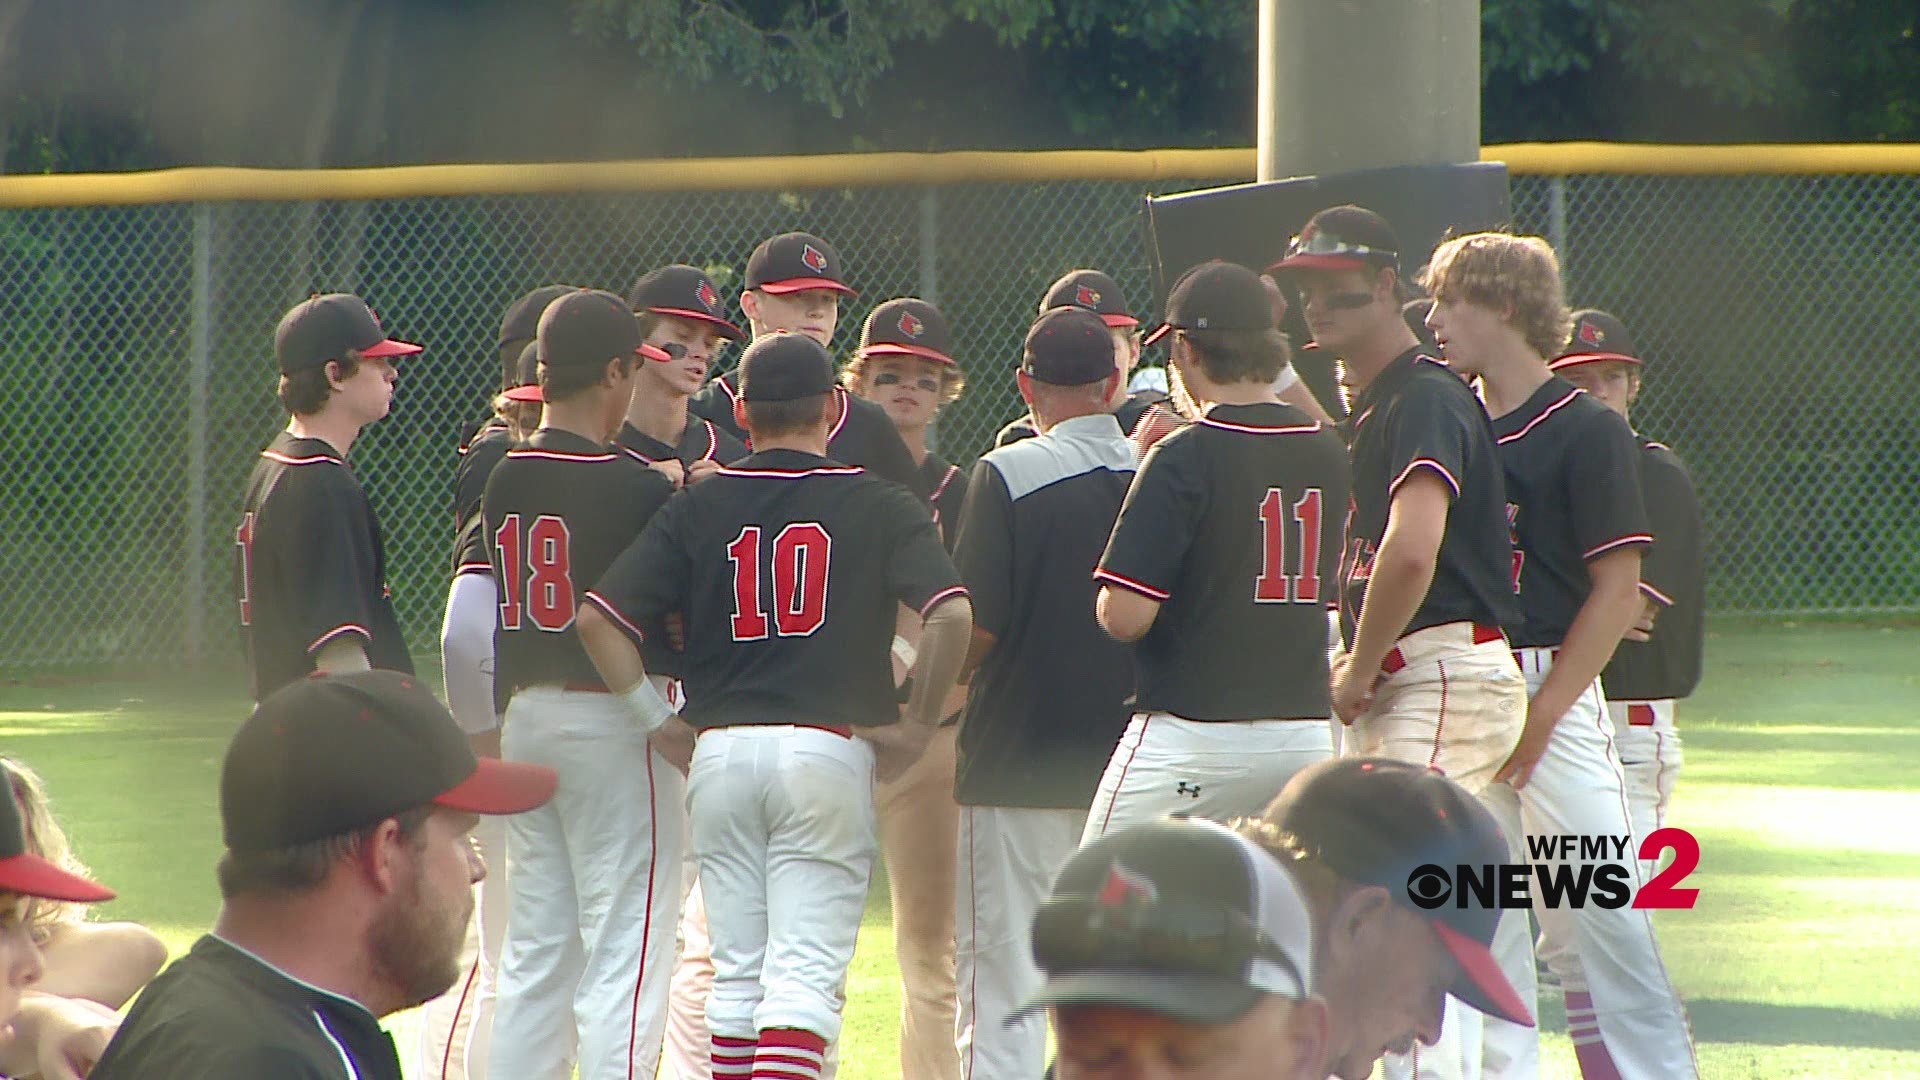 The Cardinals will take on the Granville Central vs. Perquimans winner in the 1A Championship Series